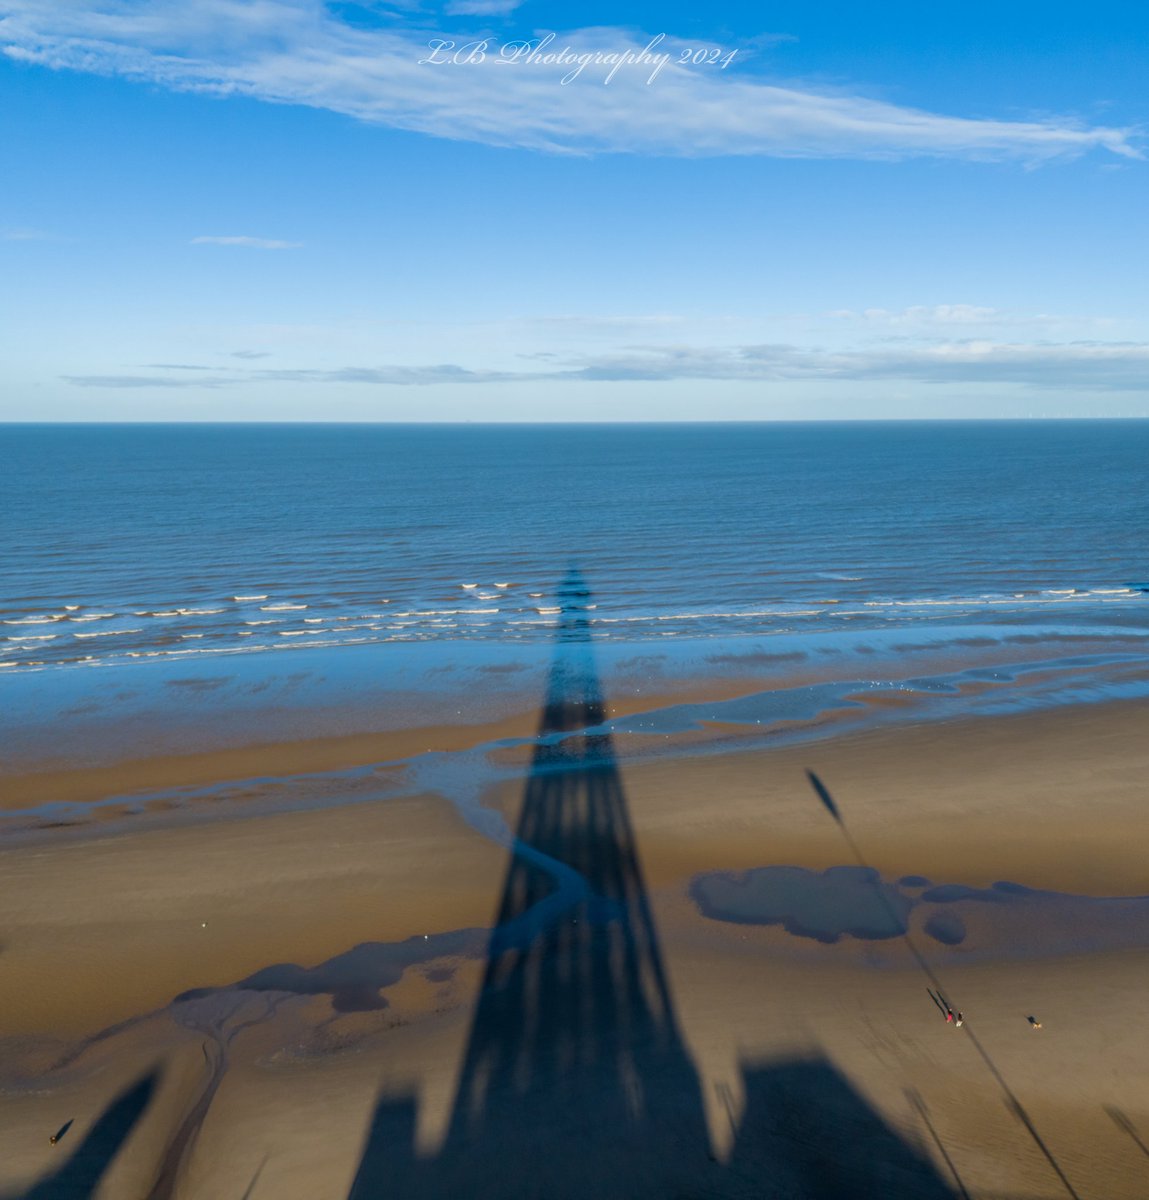 A beautiful start to the morning here in Blackpool with a great shadow of the Blackpool Tower. #Blackpool #sunrise #Blackpooltower #Blackpoolcouncil #sunnyday #weather #VisitBlackpool